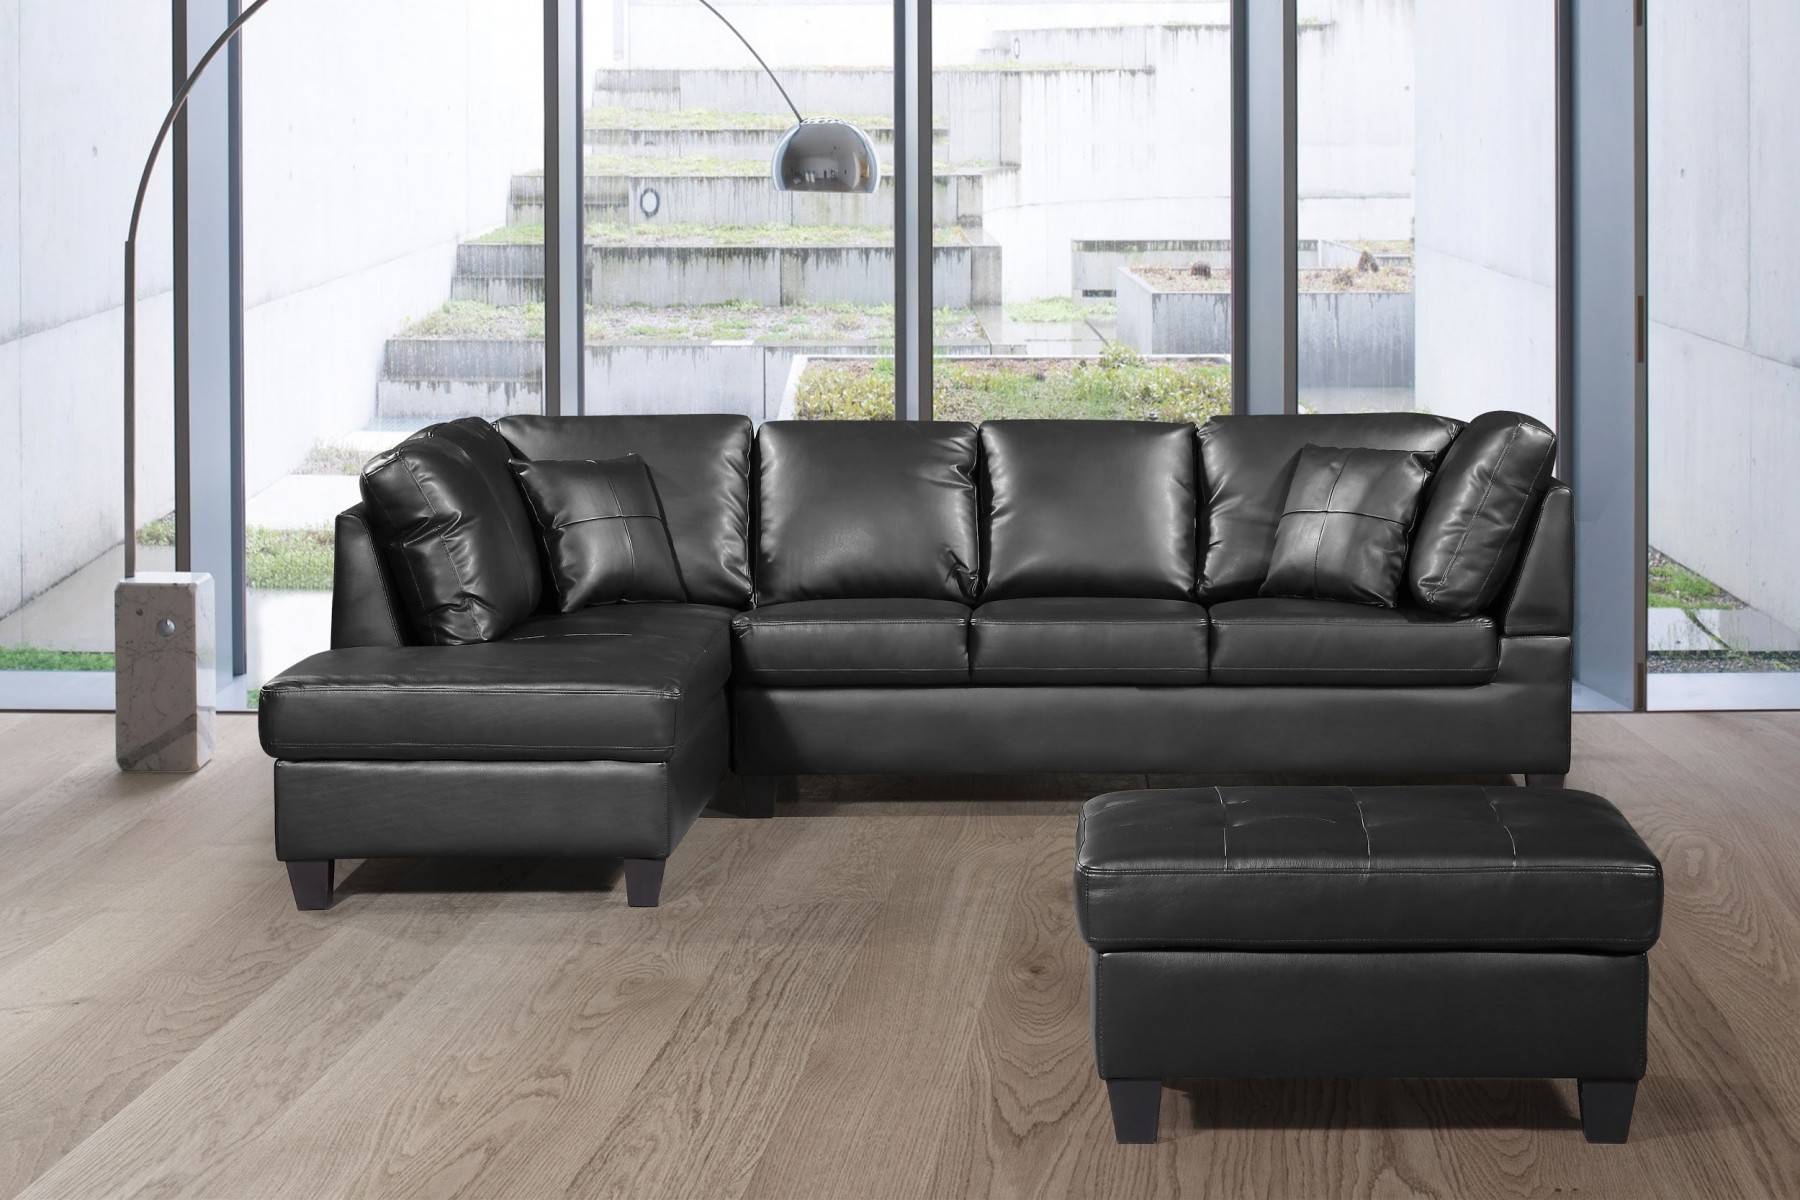 black bonded leather sectional sofa with single recliner